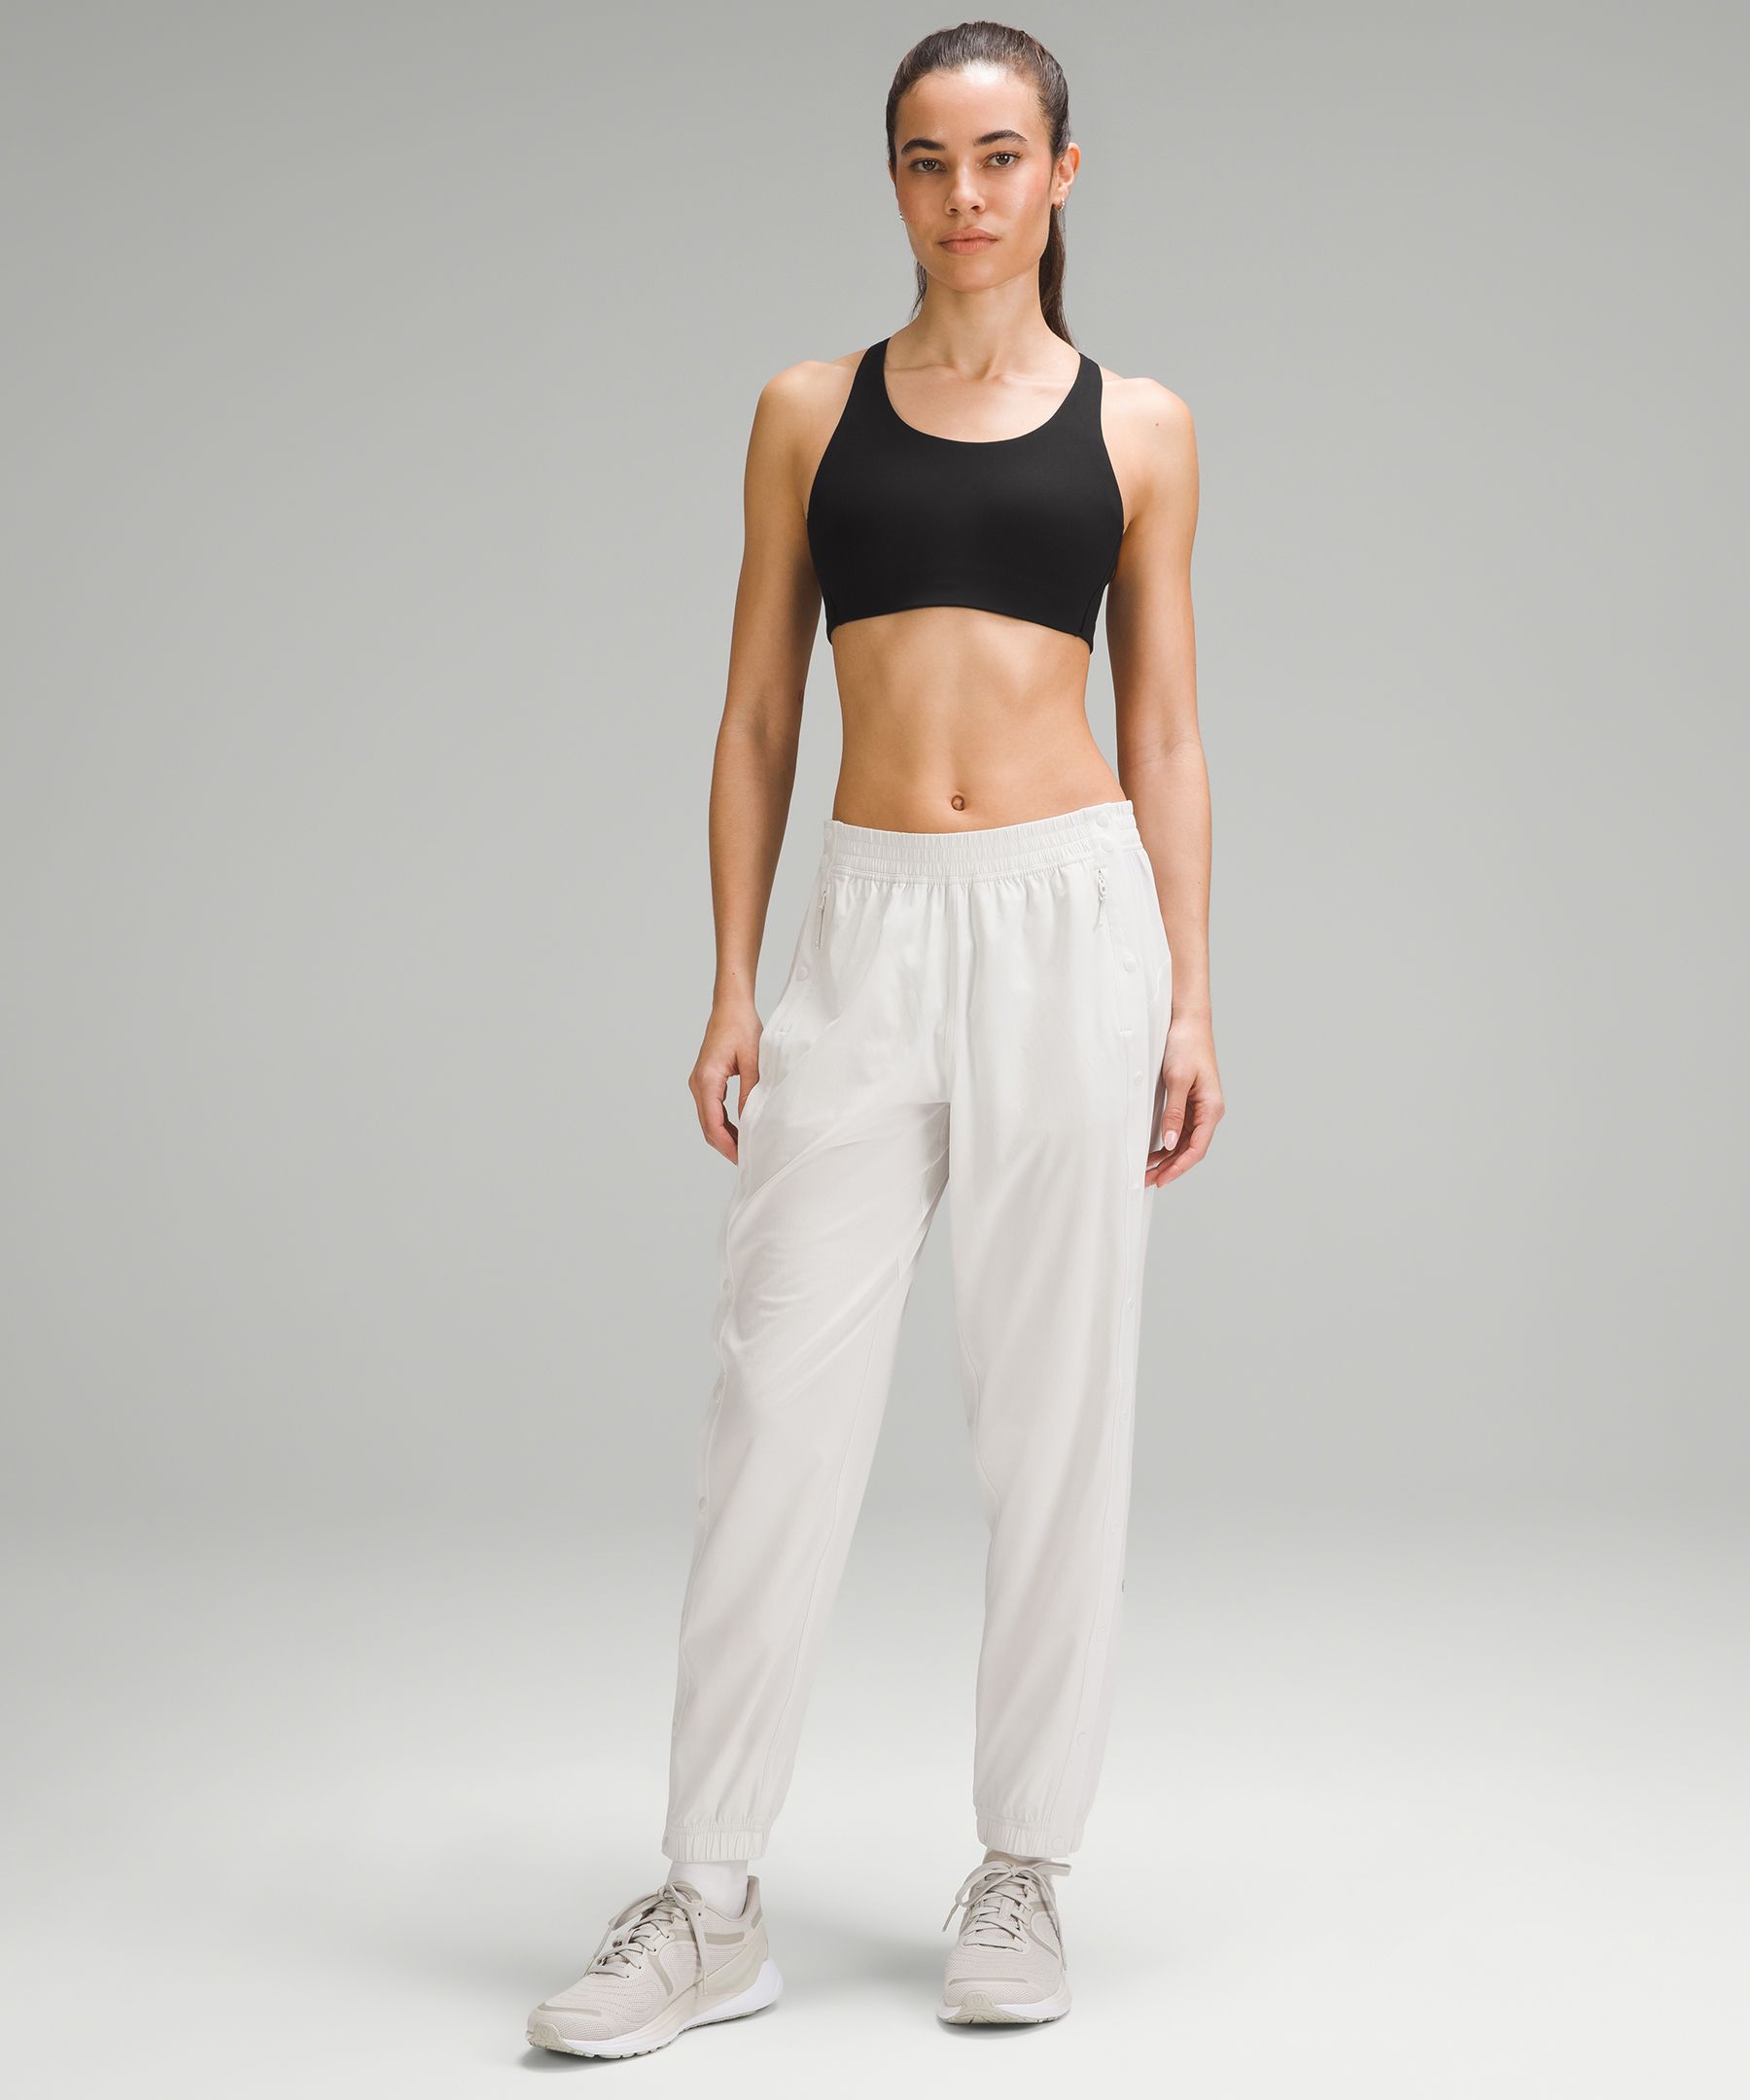 Lululemon Sports Bra White Size 32 B - $35 (41% Off Retail) - From molly